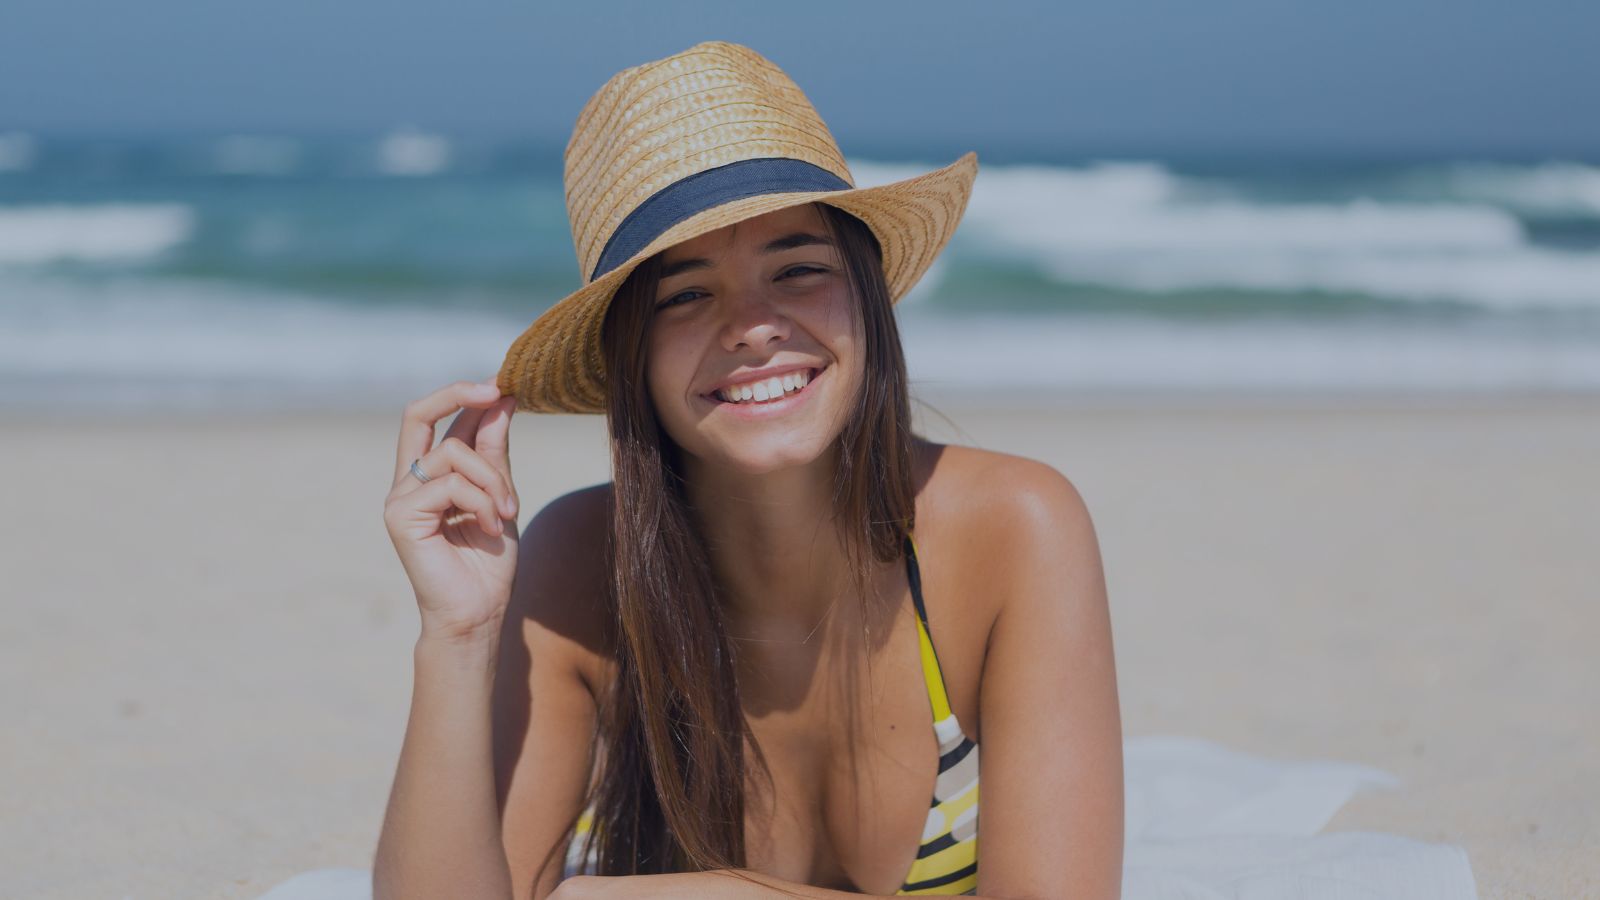 Girl at the beach wearing a hat